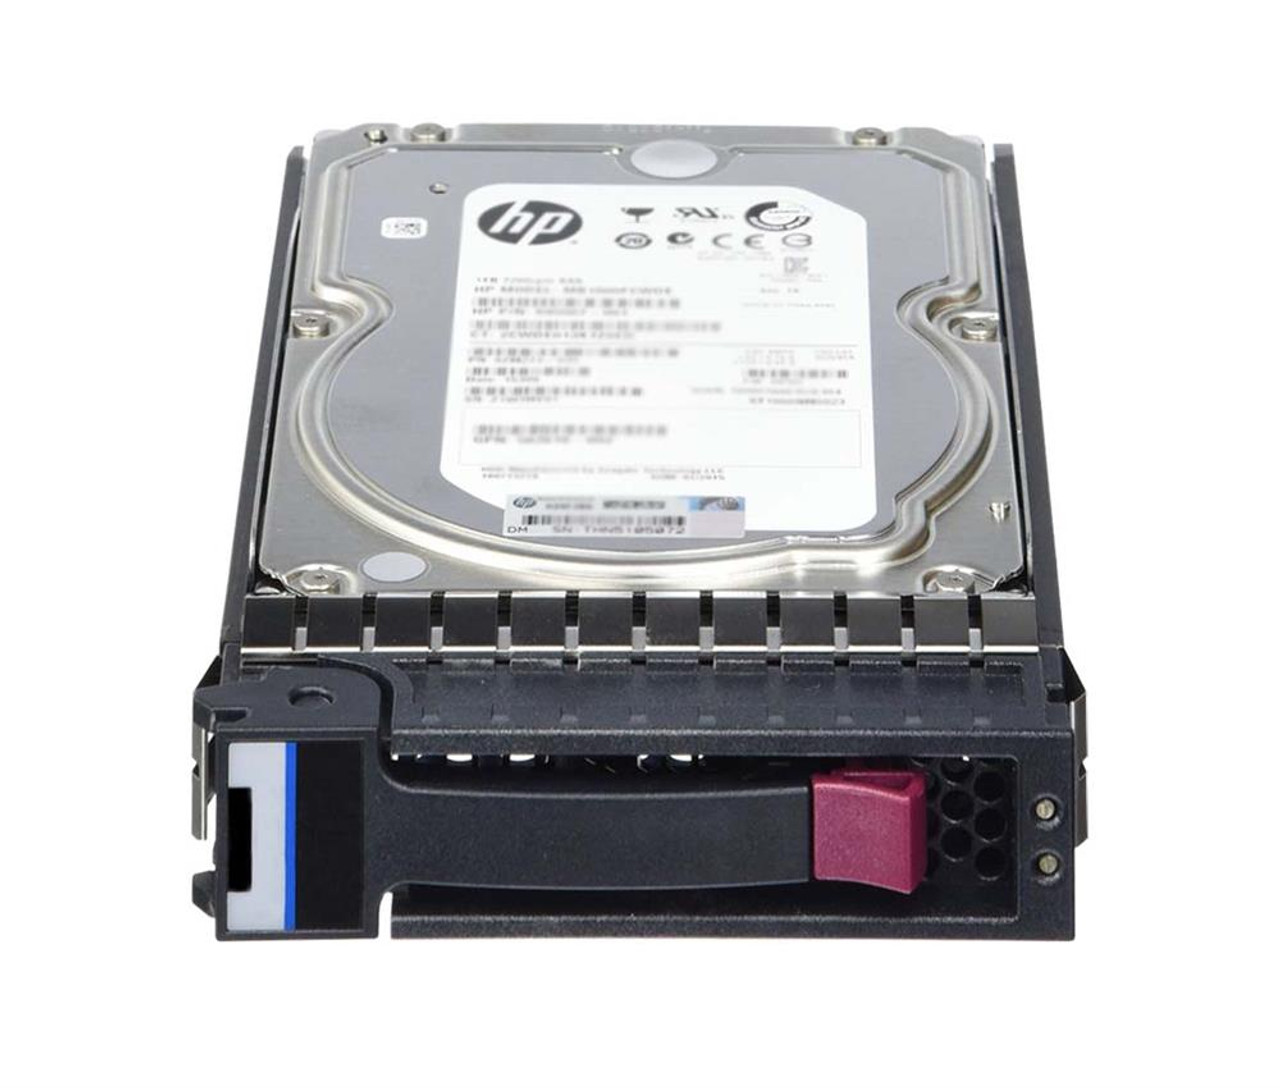 862141-001 HPE 4TB 7200RPM SAS 12Gbps Midline 3.5-inch Internal Hard Drive with Smart Carrier